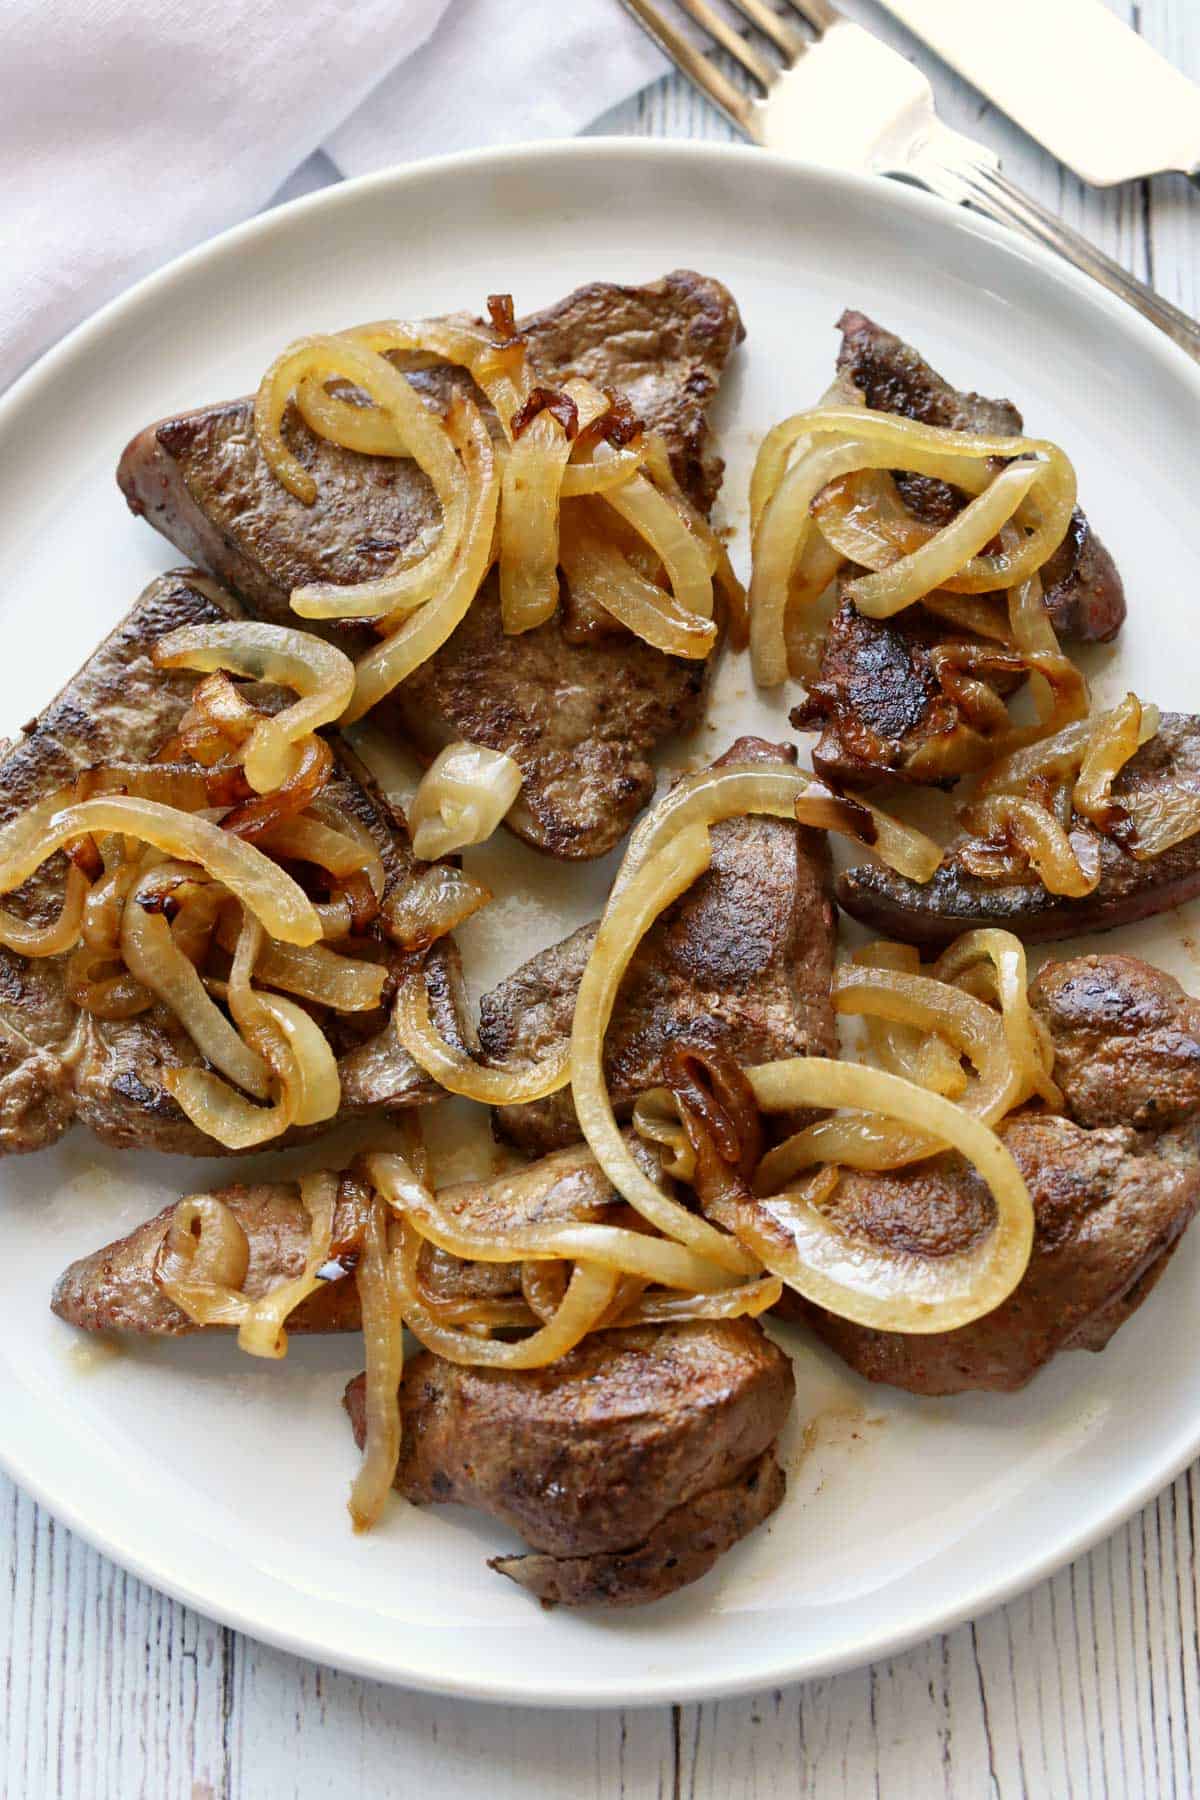 Beef liver and onions served on a white plate with a knife and a fork.